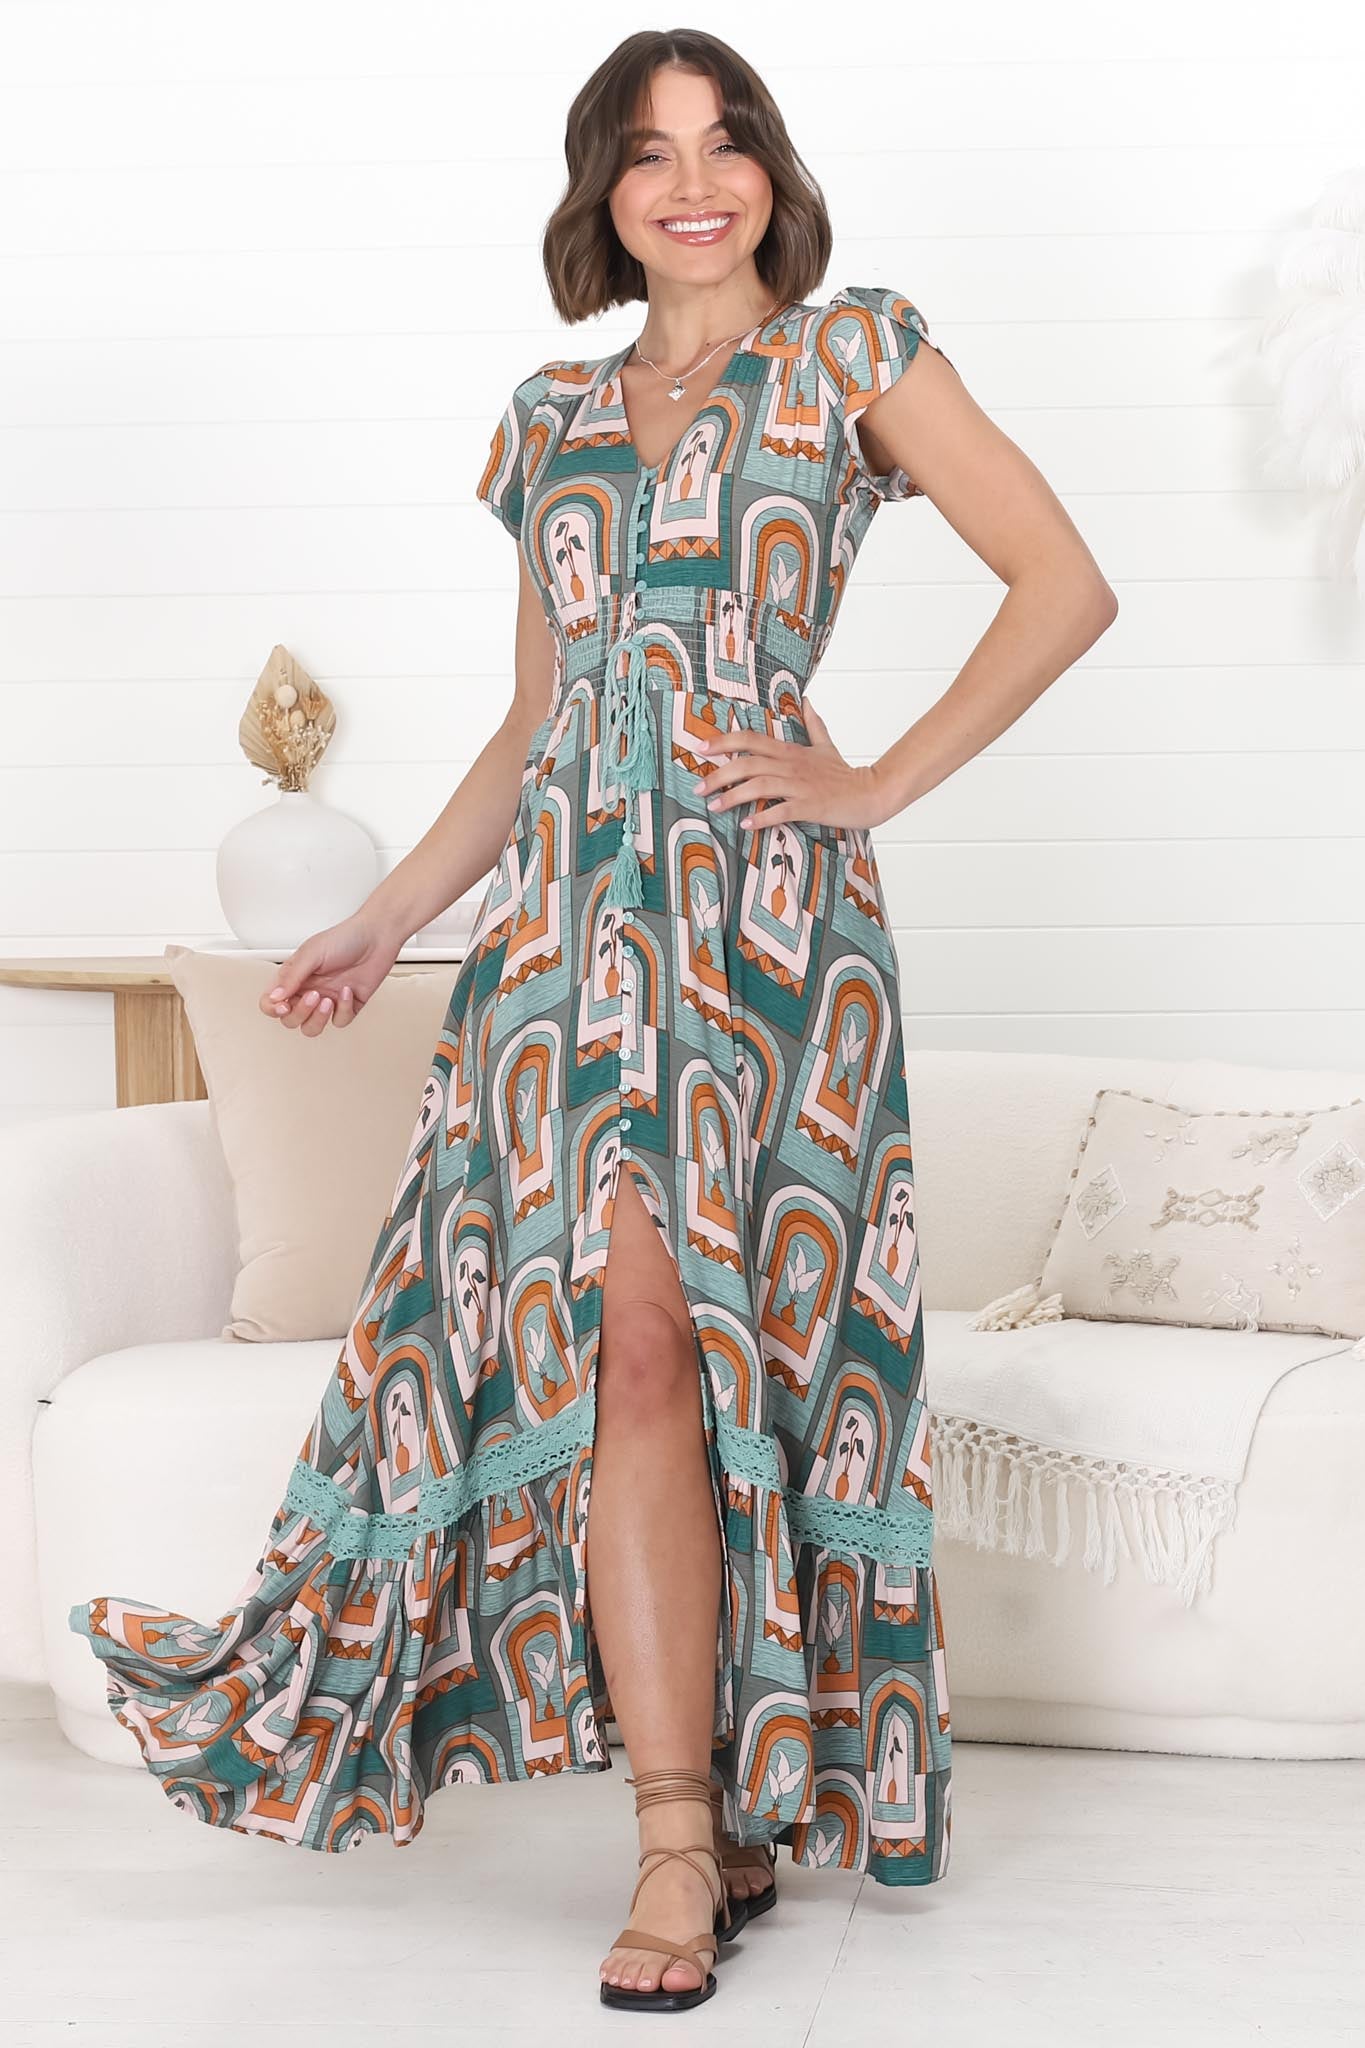 JAASE - Romi Maxi Dress: Button Down Cap Sleeve Dress with Waist Tie in Emerald Arches Print